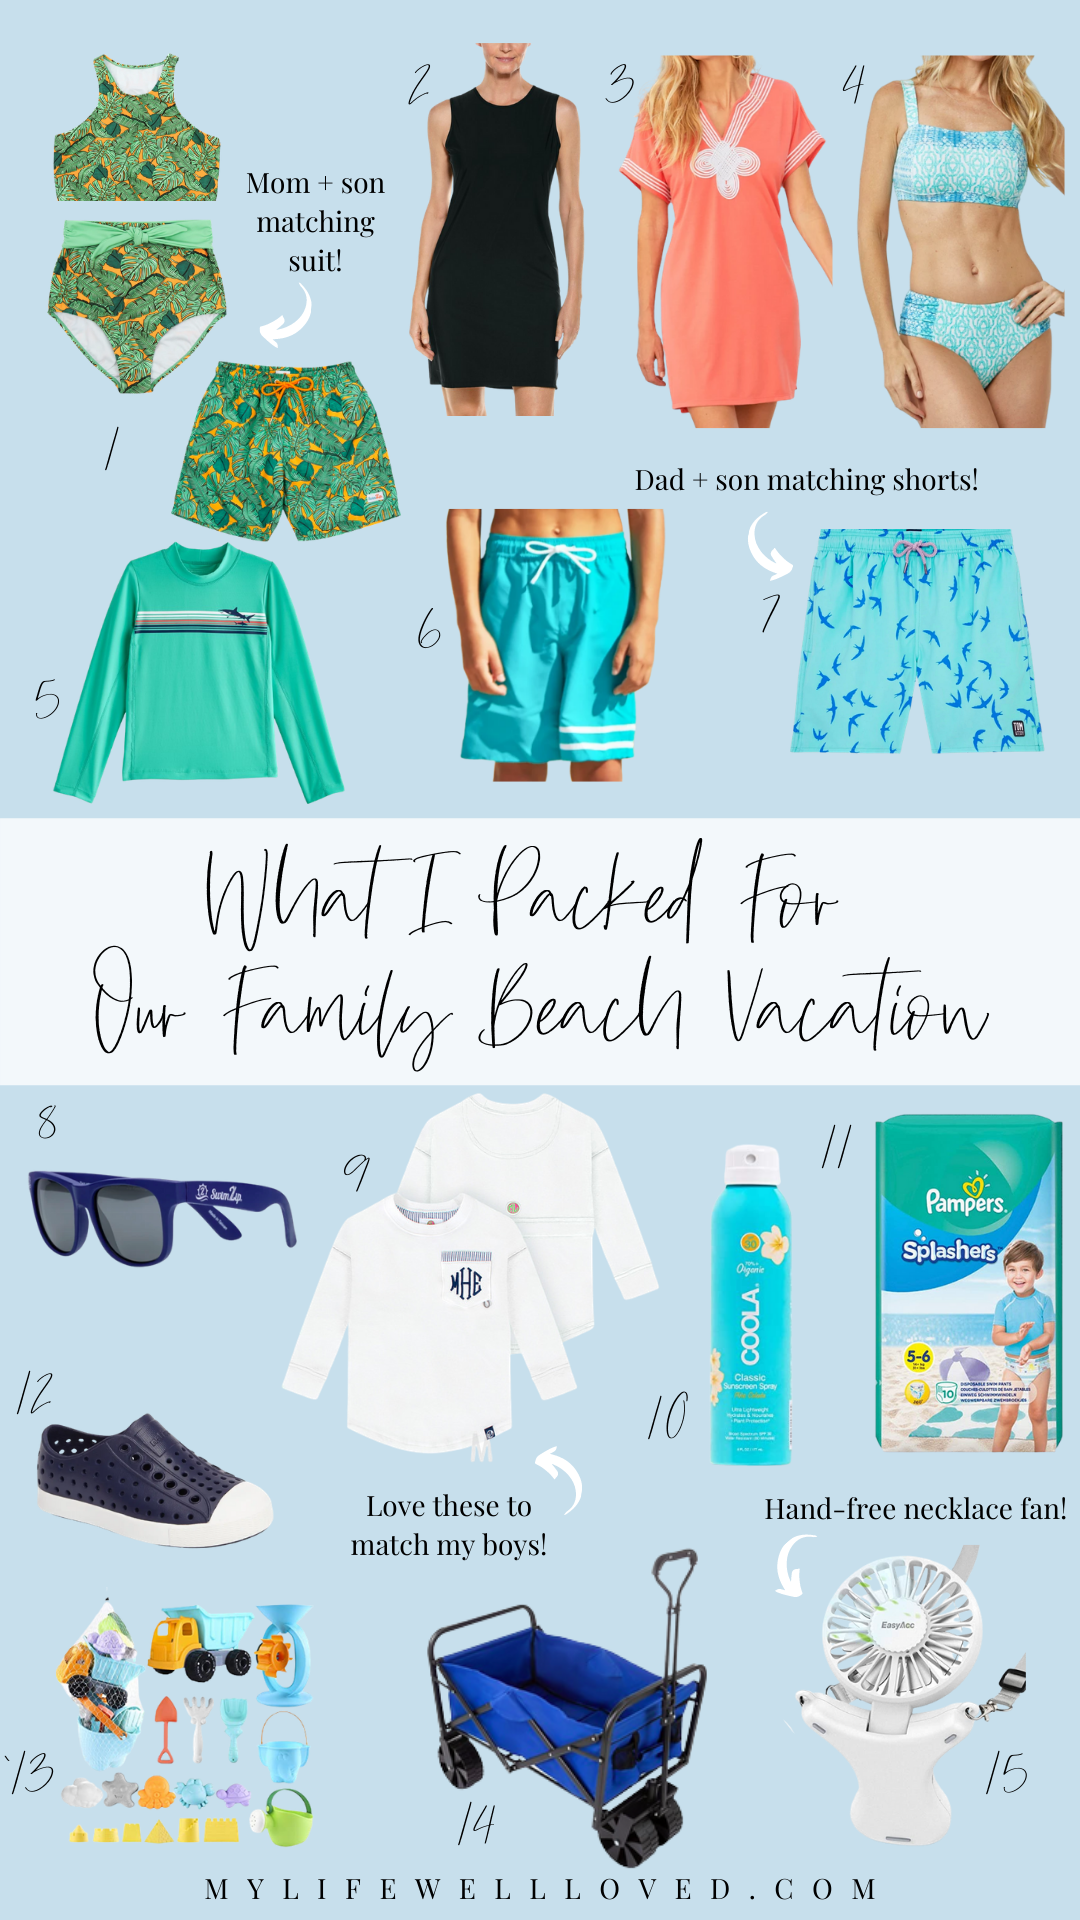 Family Beach Vacation Packing List - Healthy By Heather Brown